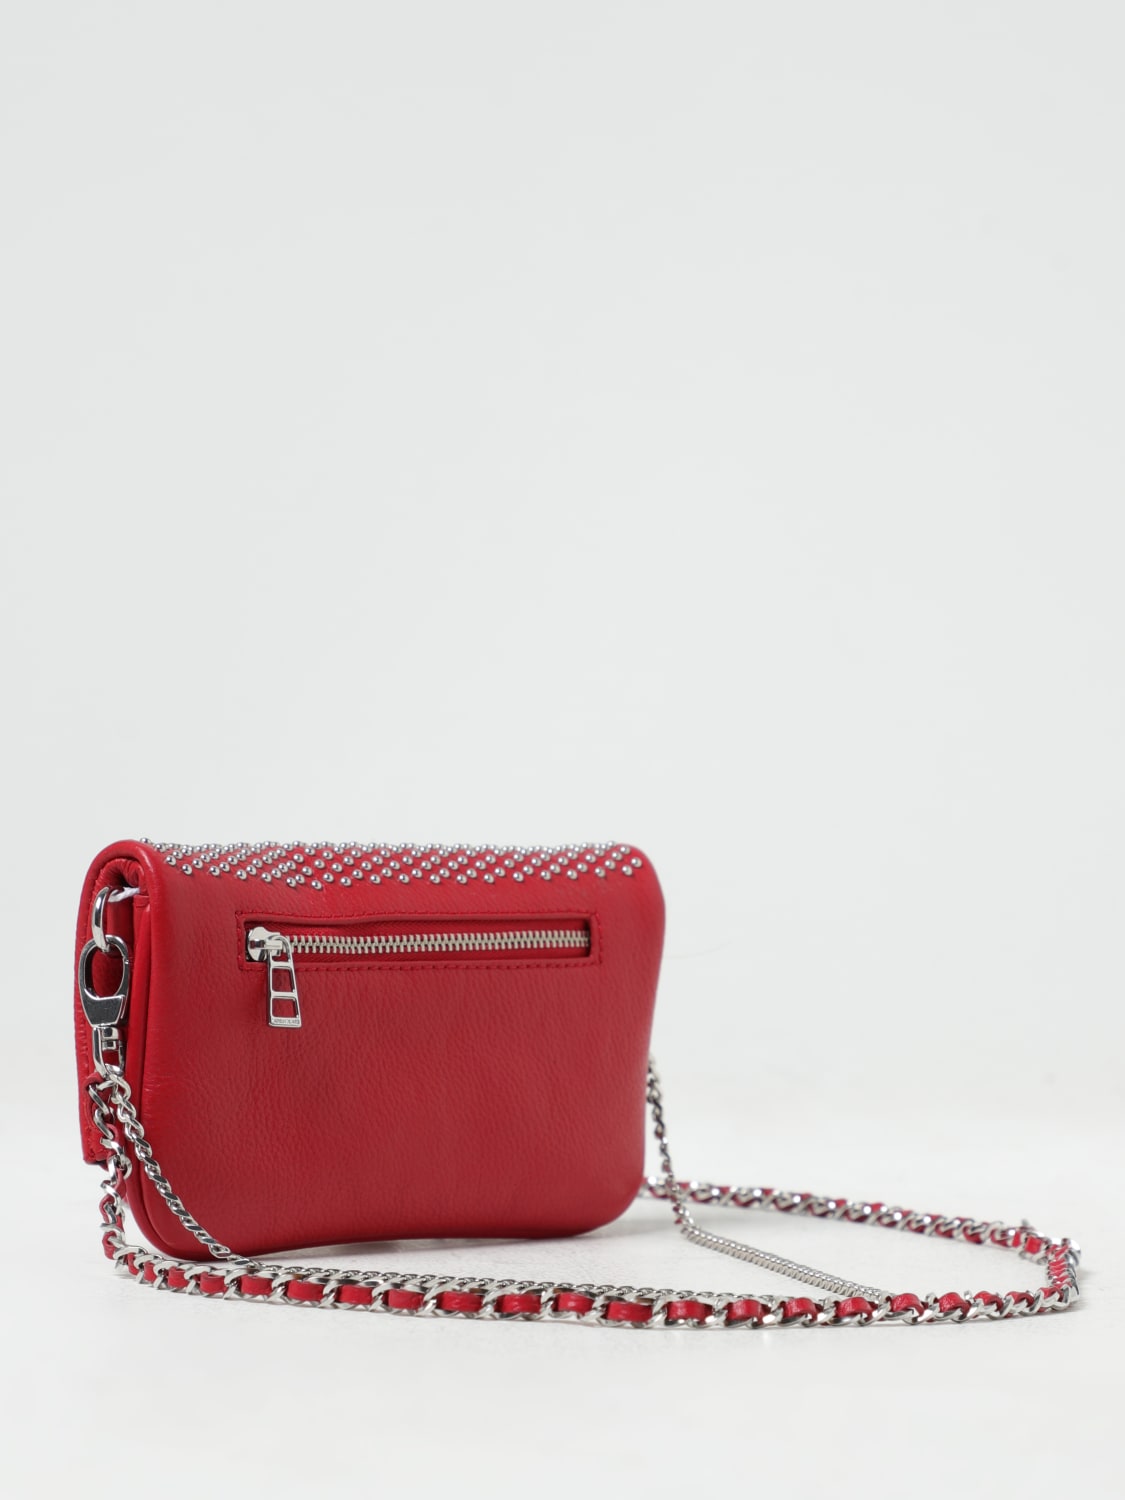 Rock Nano Hobo Bag - Zadig & Voltaire - Leather - Red